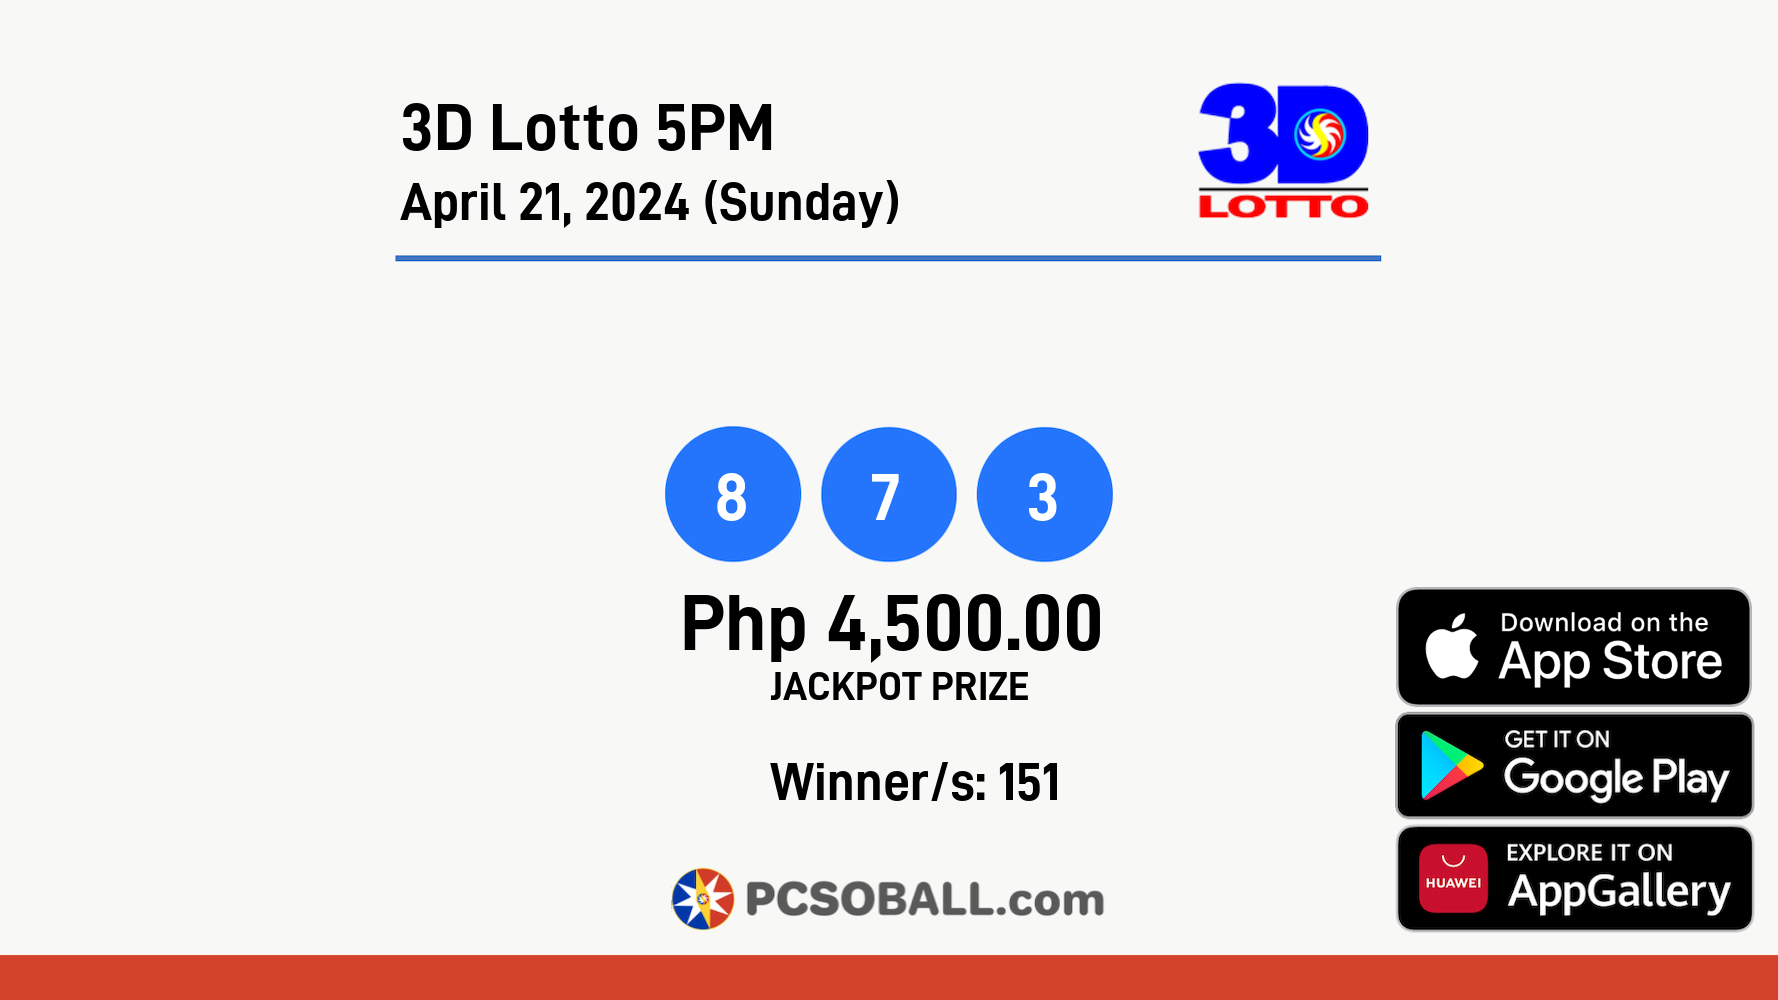 3D Lotto 5PM April 21, 2024 (Sunday) Result